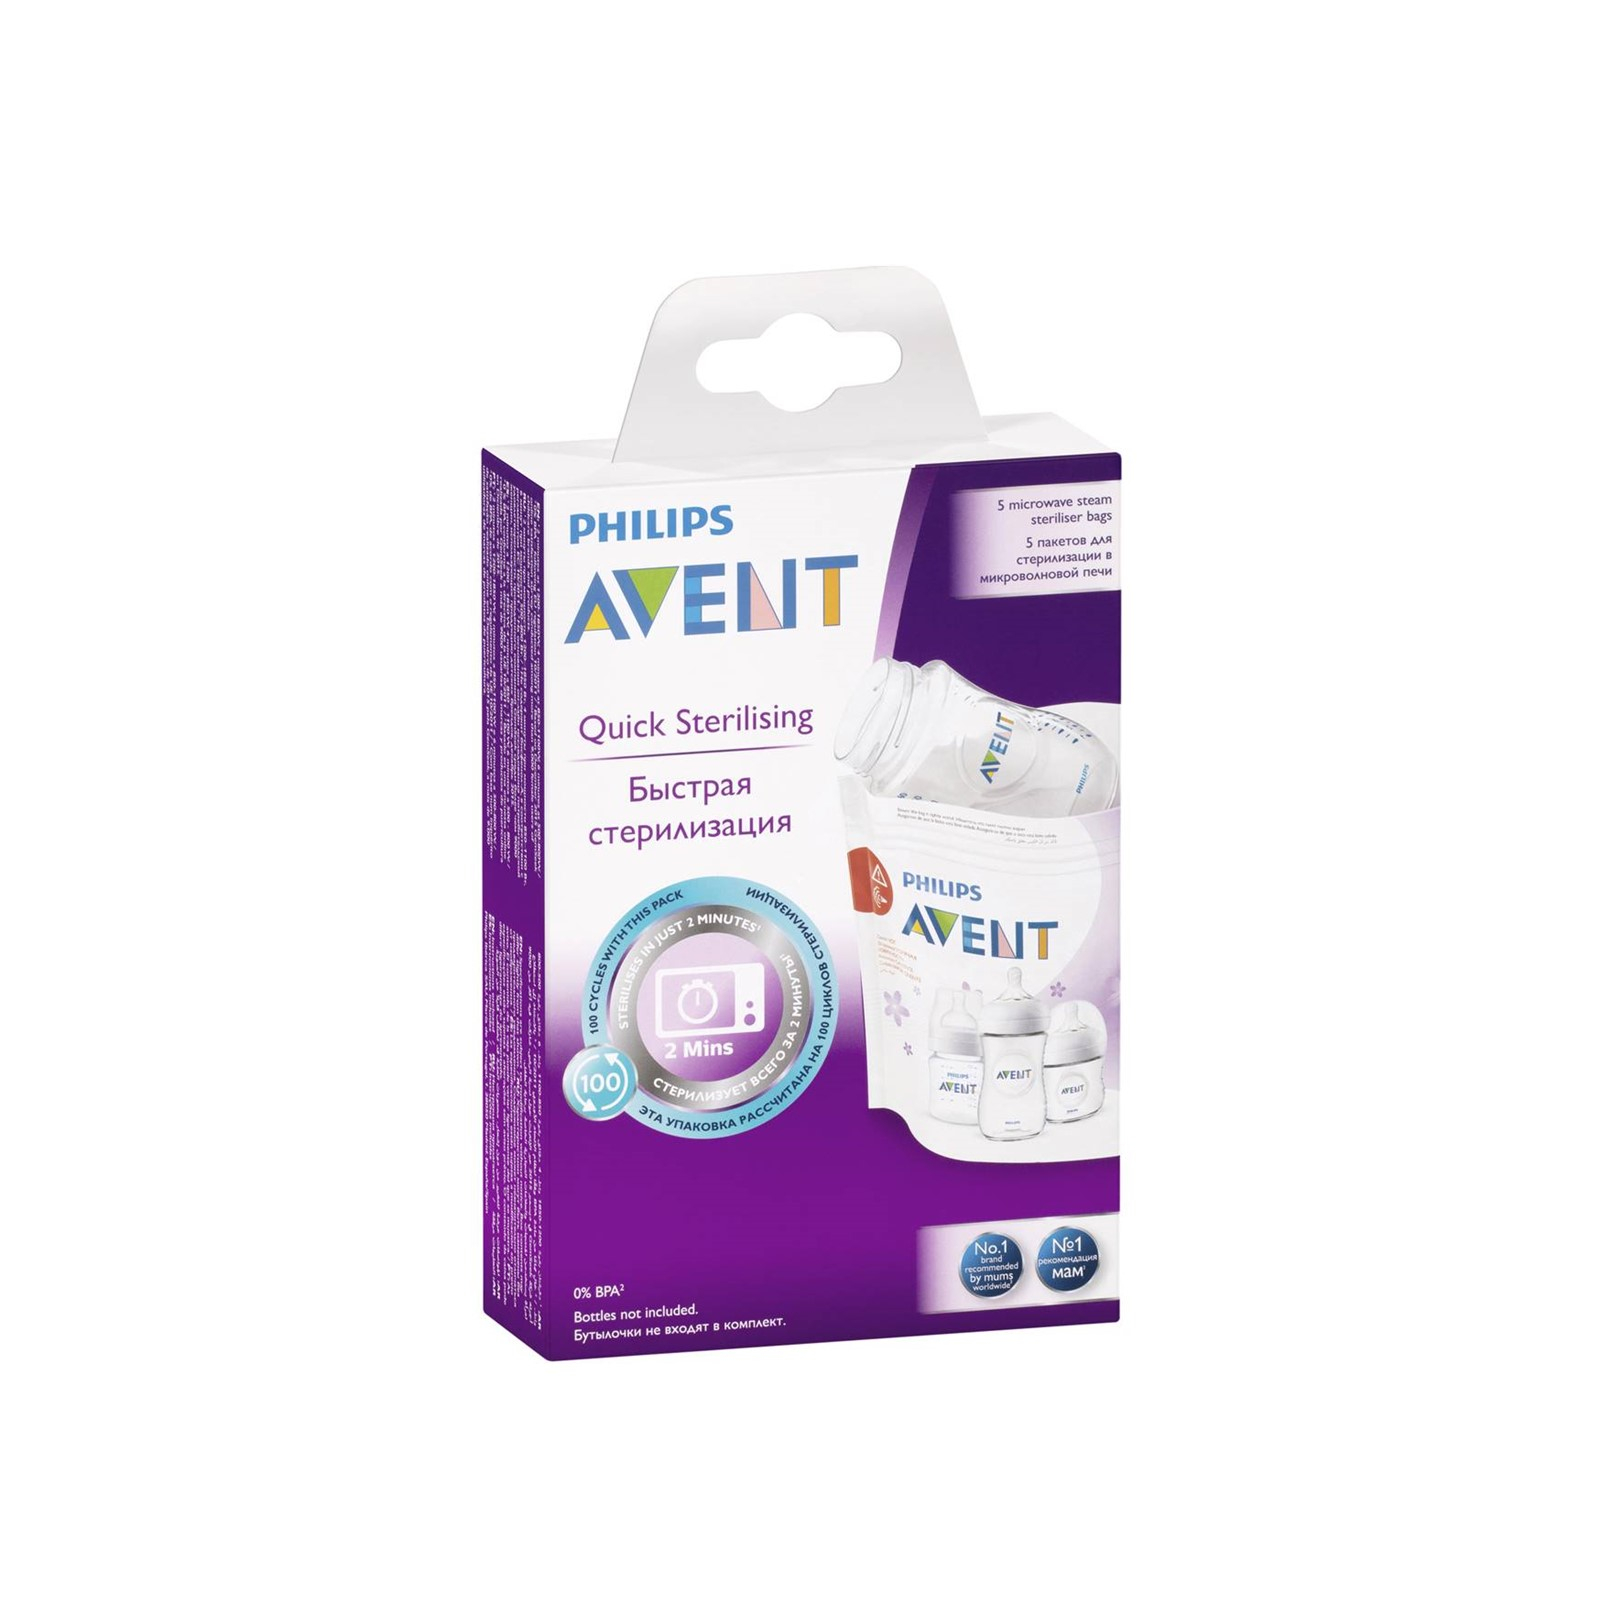 https://static.beautytocare.com/media/catalog/product/p/h/philips-avent-microwave-steam-sterilizer-bags-x5.jpg